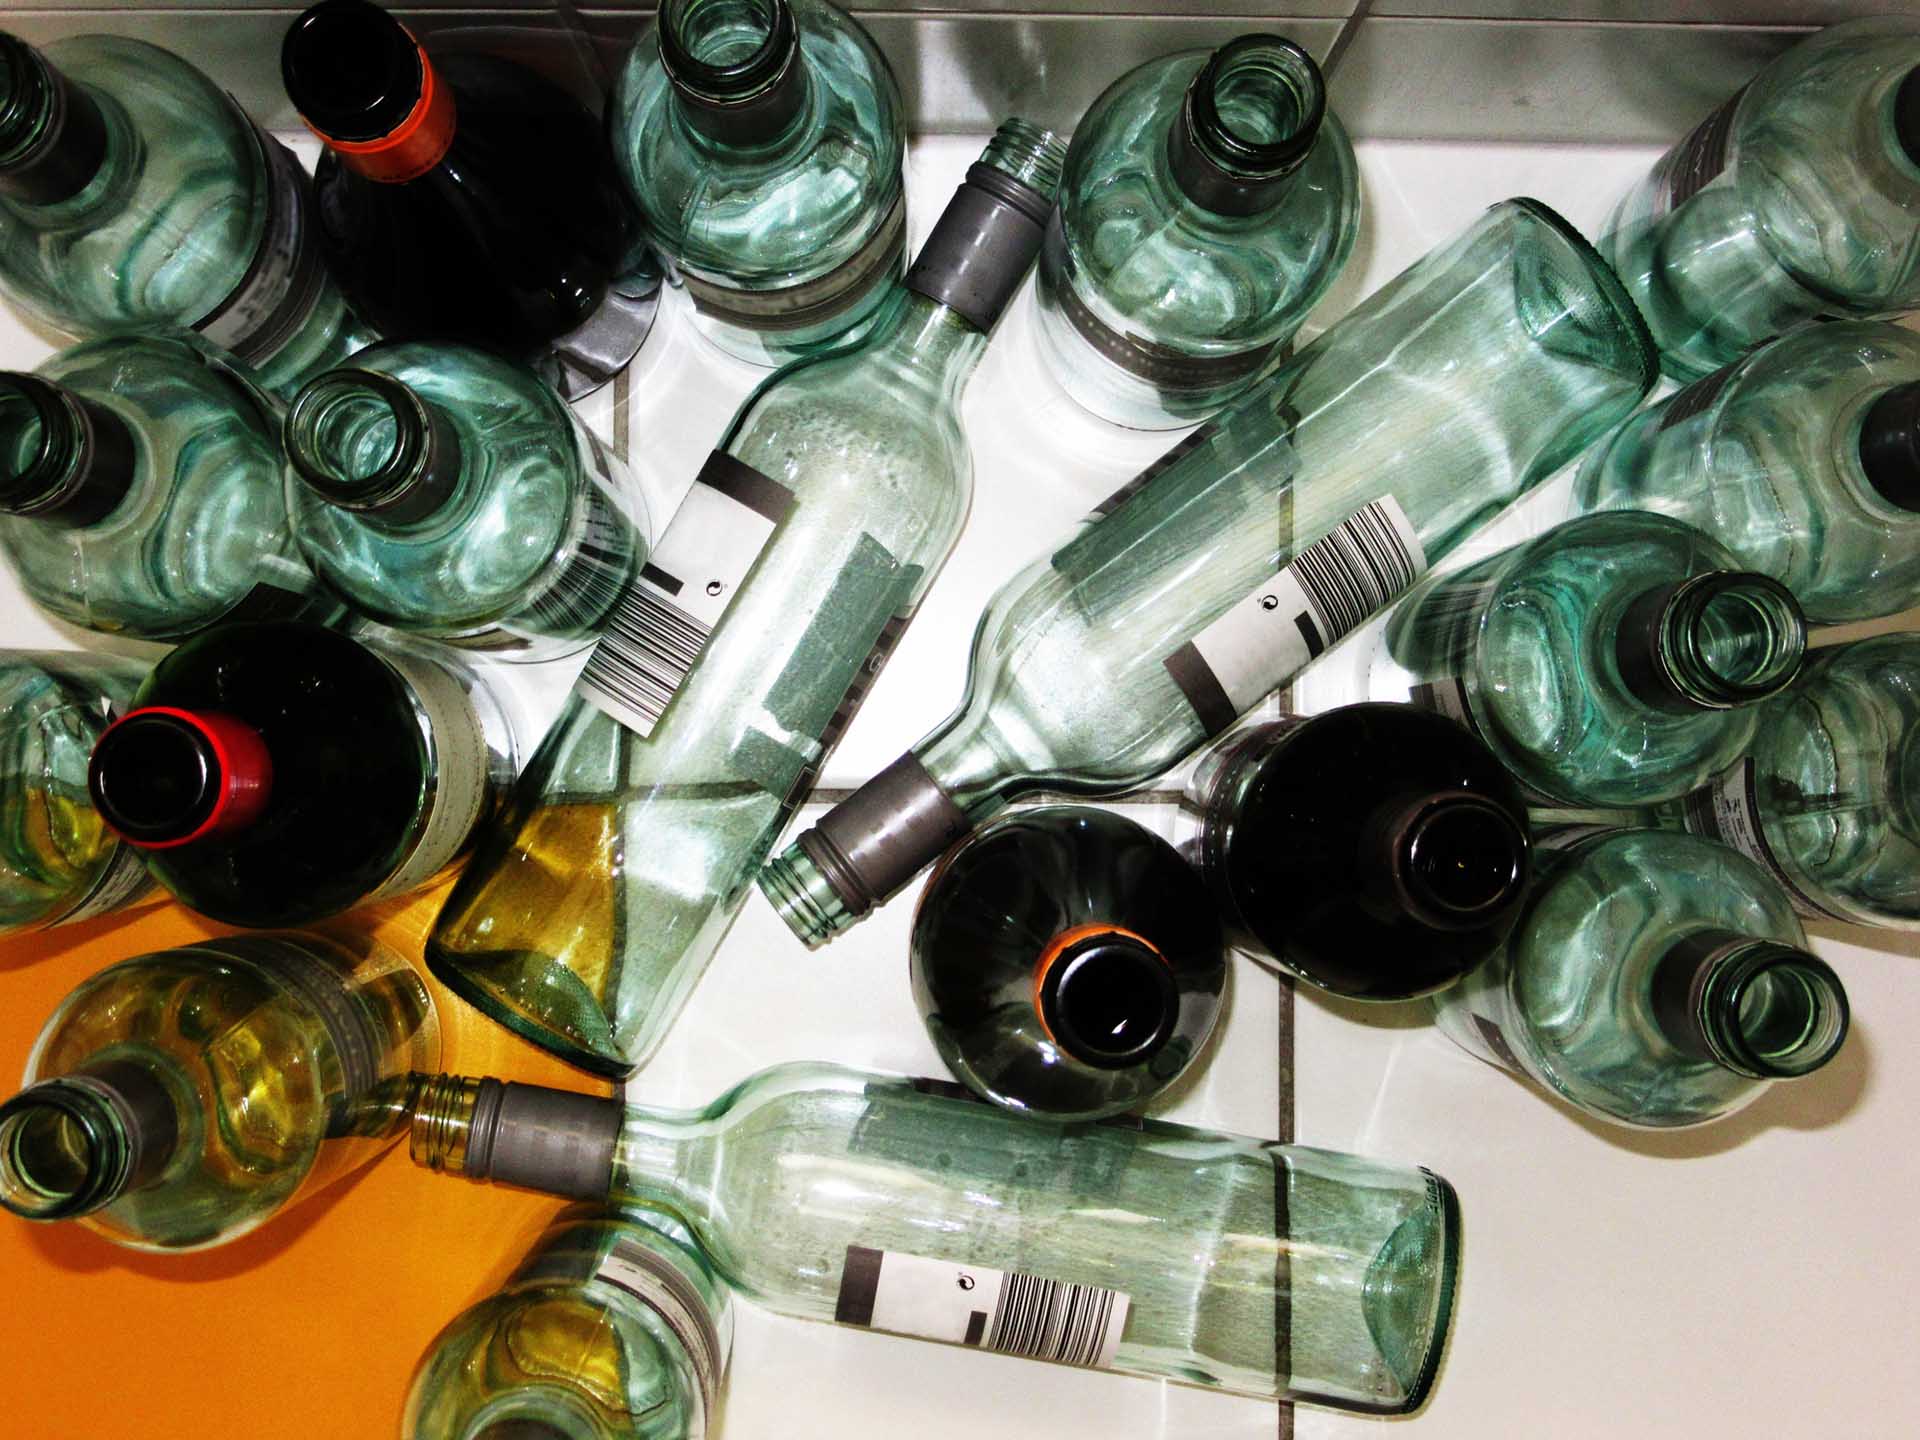 California Plans to Add Wine and Liquor Bottles to Recycling Program